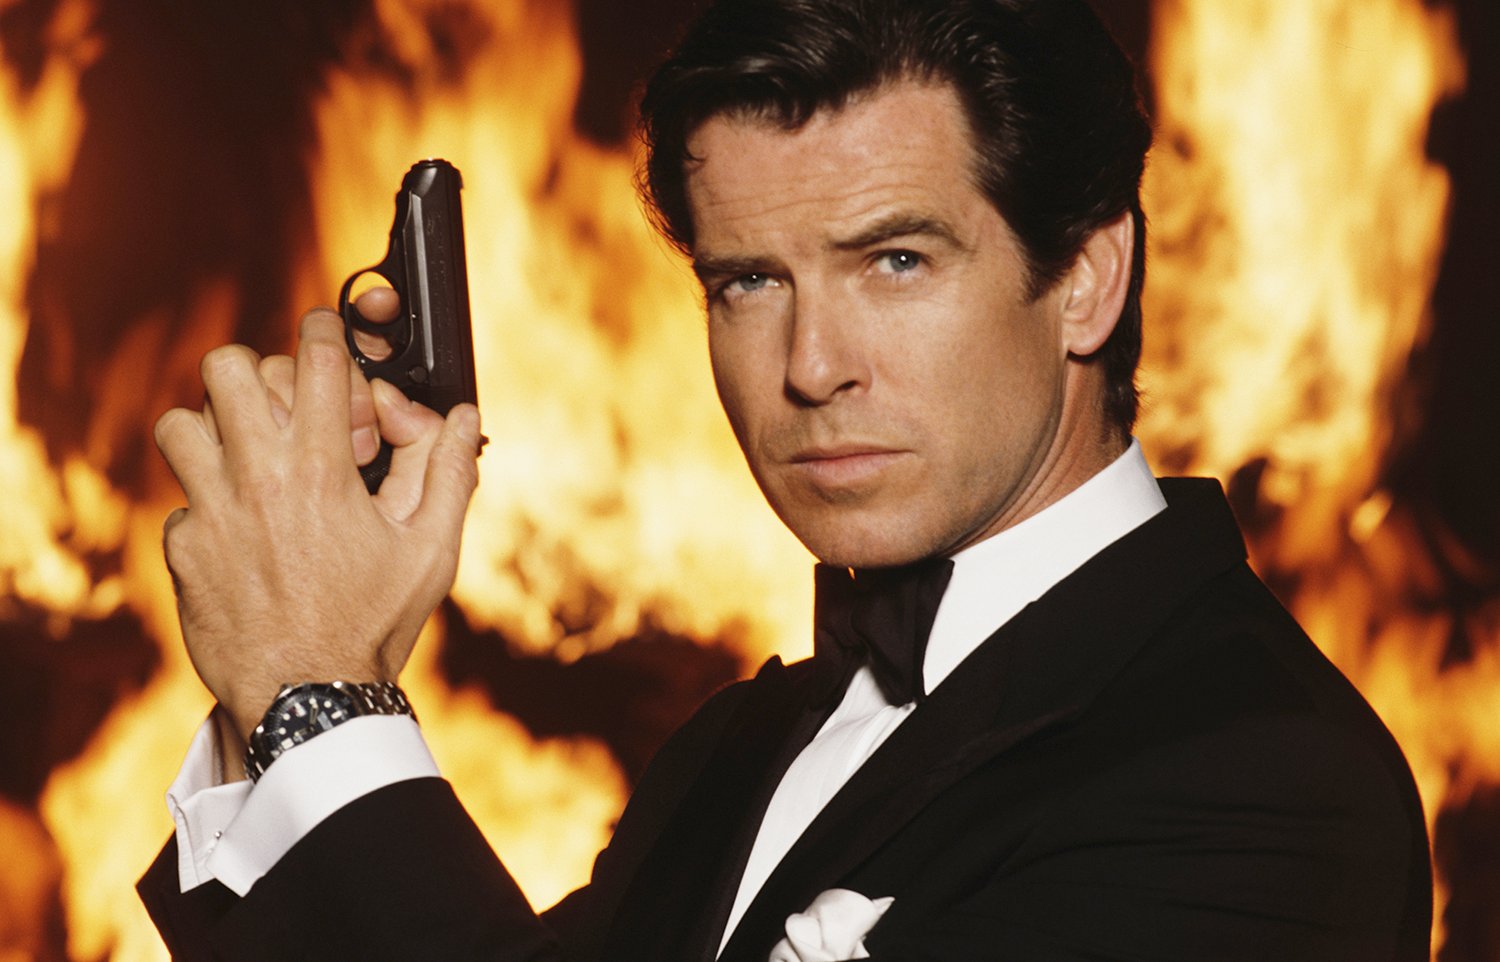 Xbox GoldenEye 007 remaster could be coming soon after